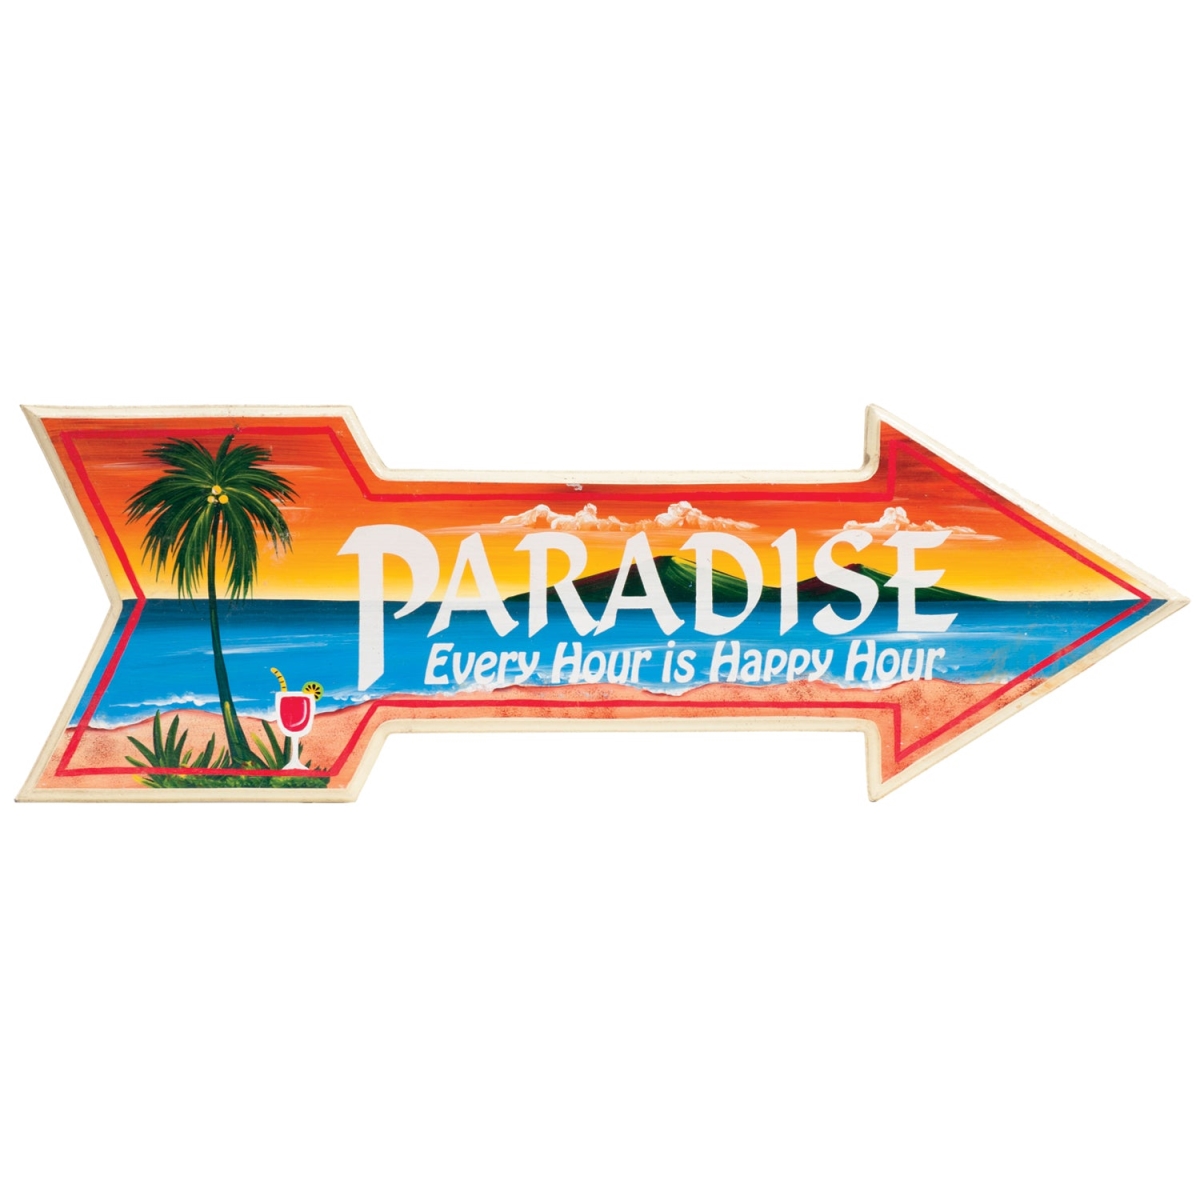 KD Pecho Hand Painted Paradise & Every Hour Is Happy Hour Wall Art Sign